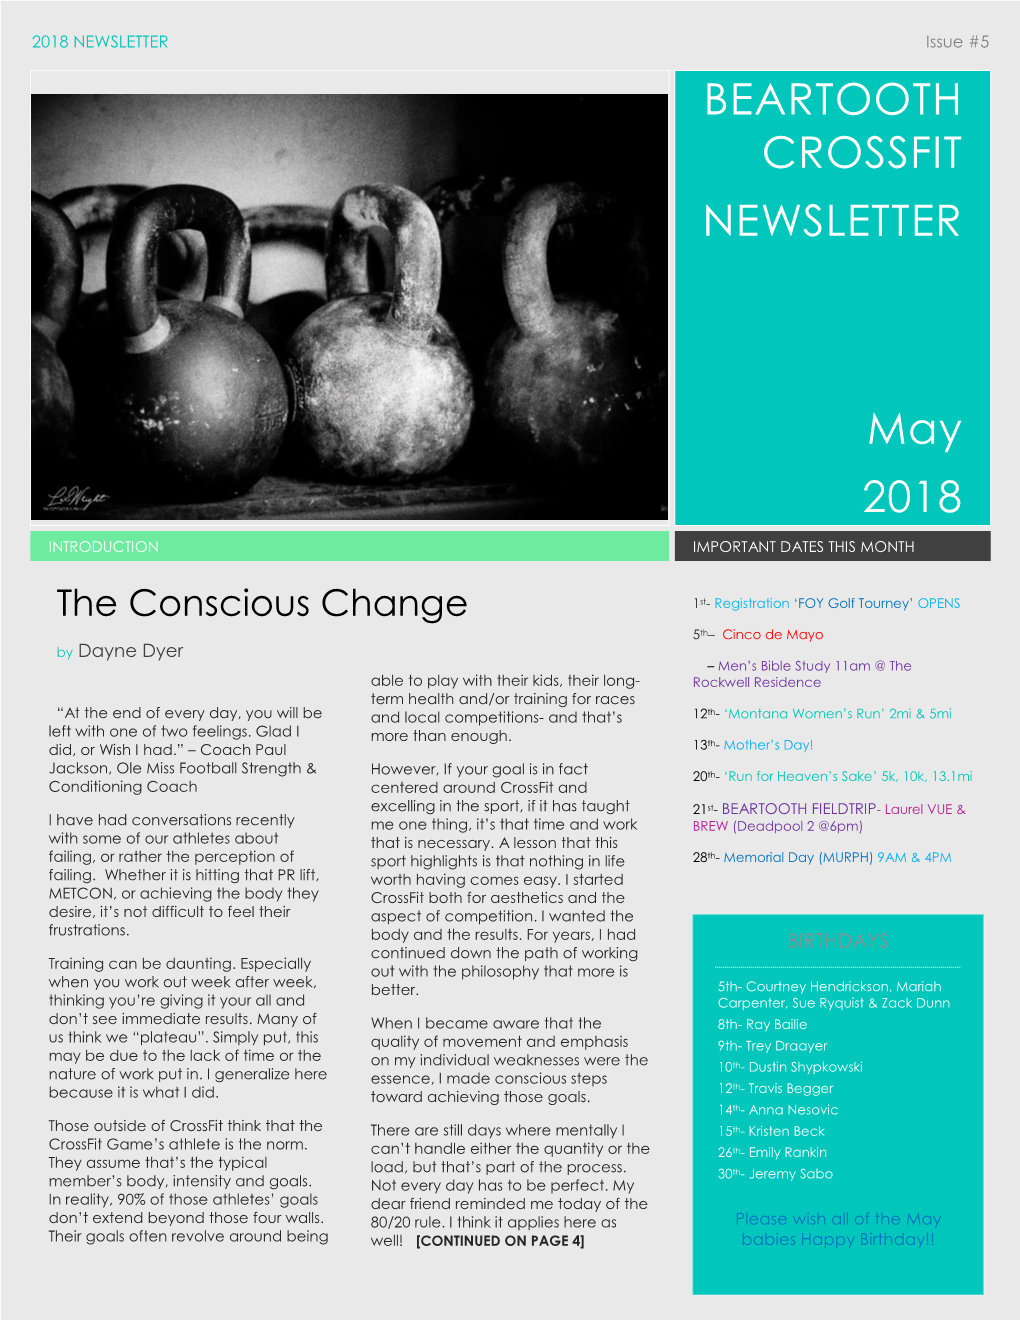 BEARTOOTH CROSSFIT NEWSLETTER May 2018